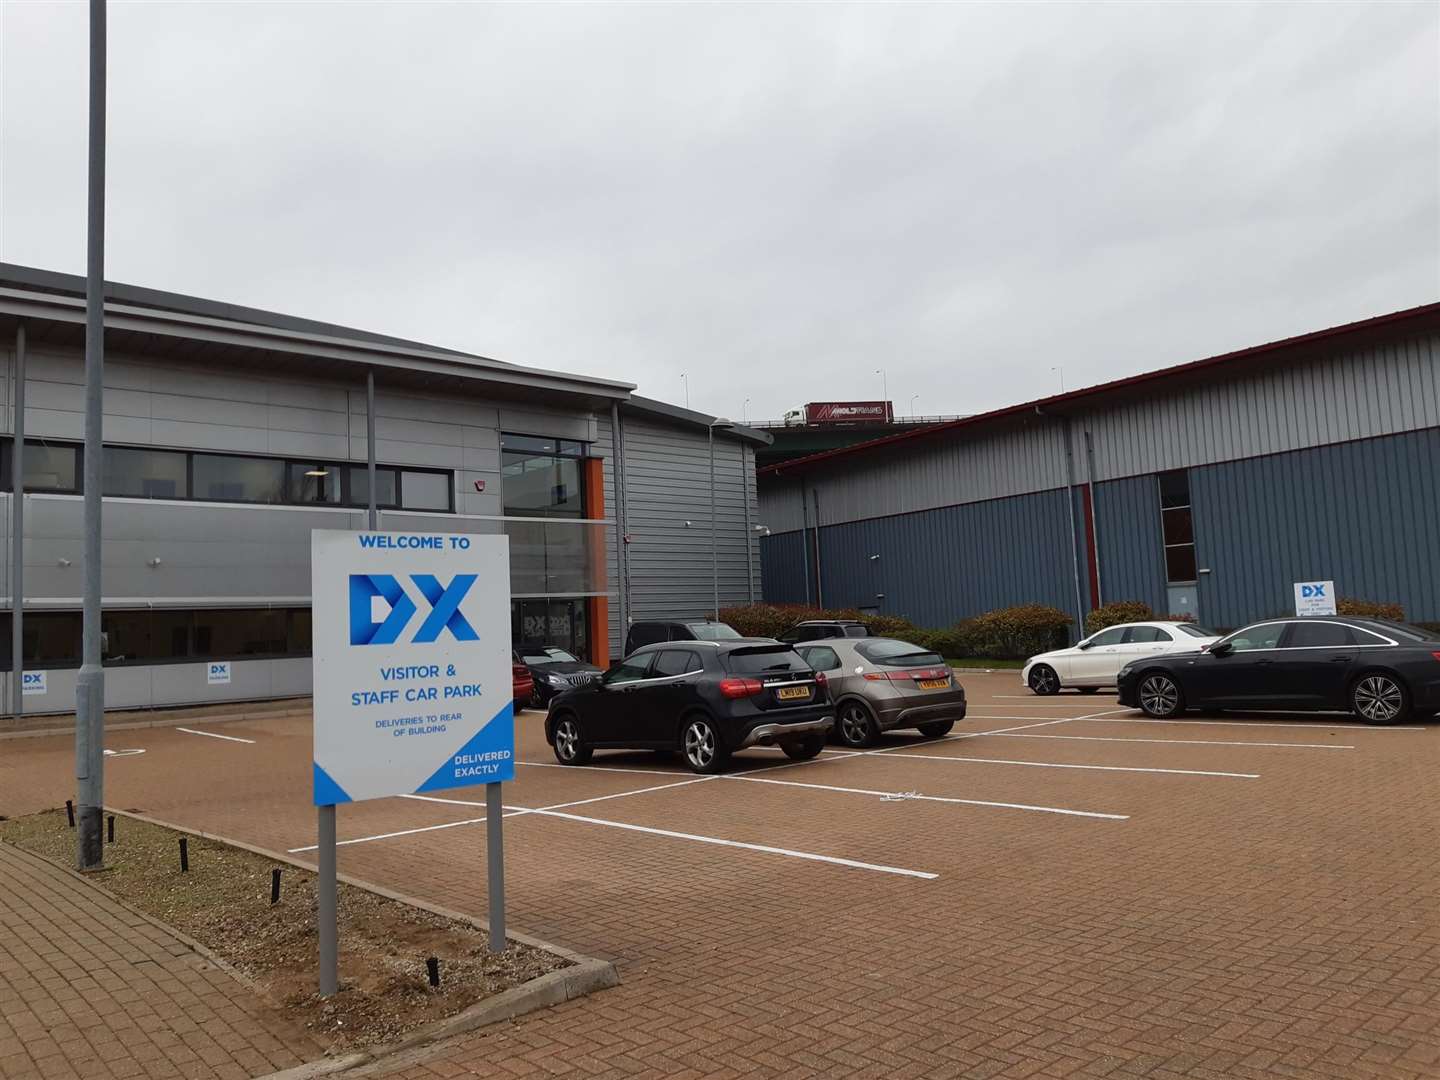 DX is opening a new depot in Dartford